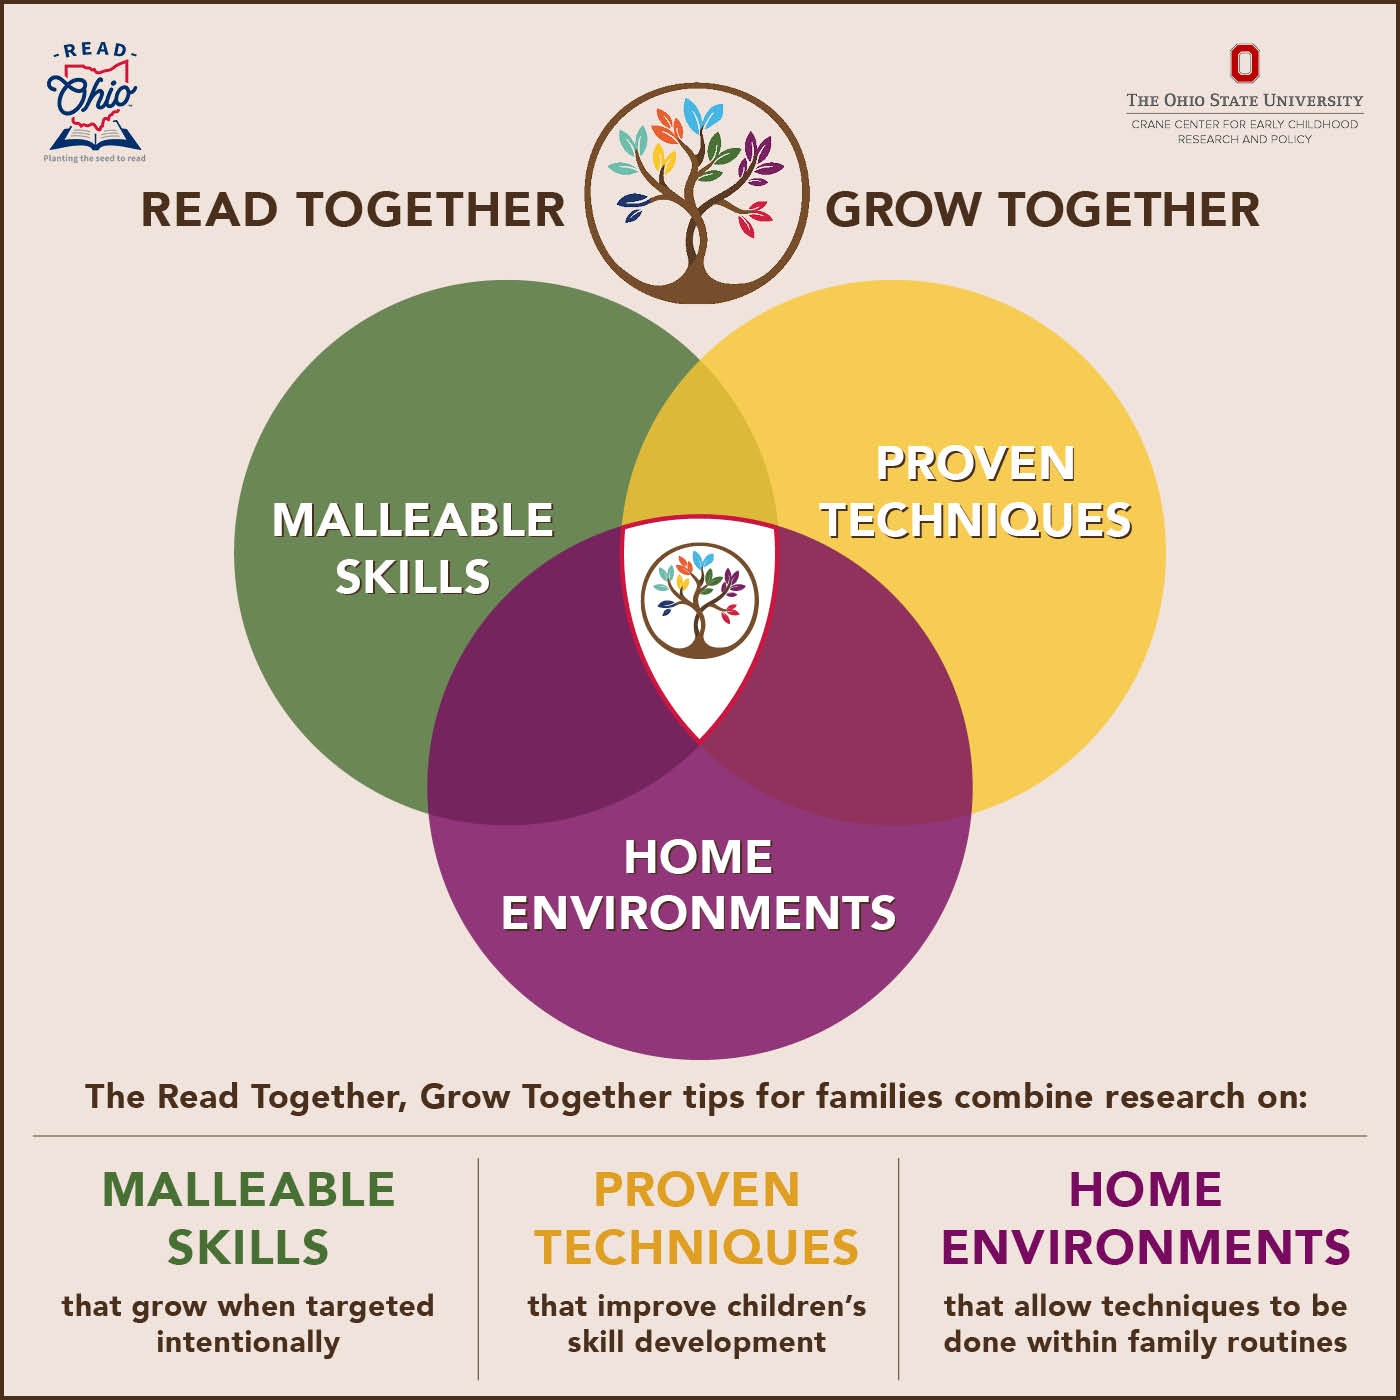 Venn diagram showing where malleable skills, proven techniques, and home environments overlap to form the Read Together, Grow Together tips for families.